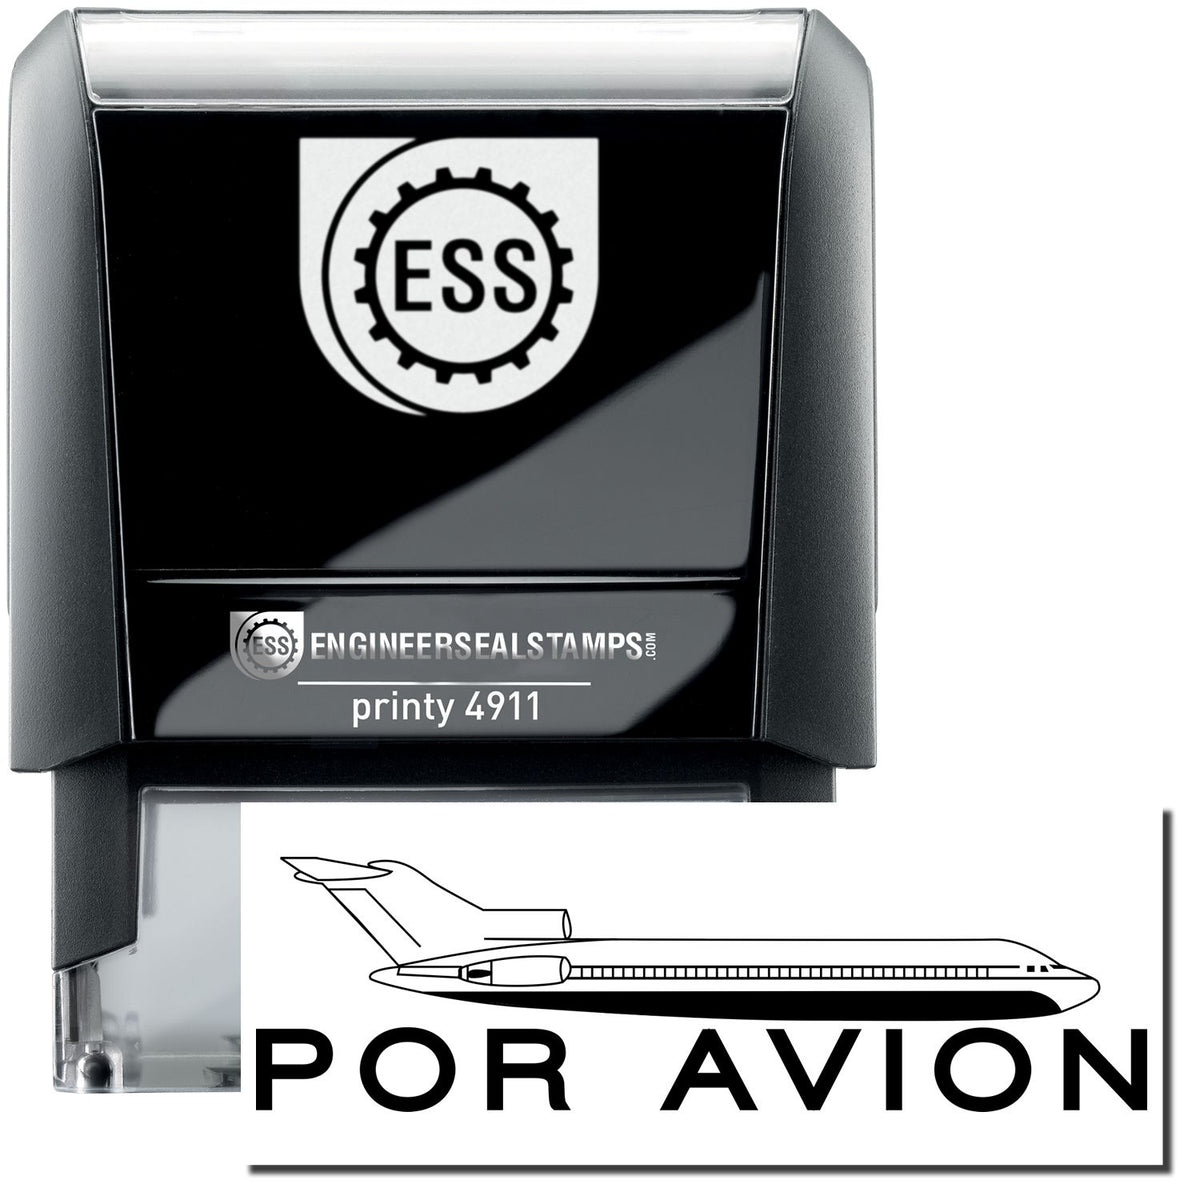 A self-inking stamp with a stamped image showing how the text &quot;POR AVION&quot; with an icon of an airplane above the text is displayed after stamping.